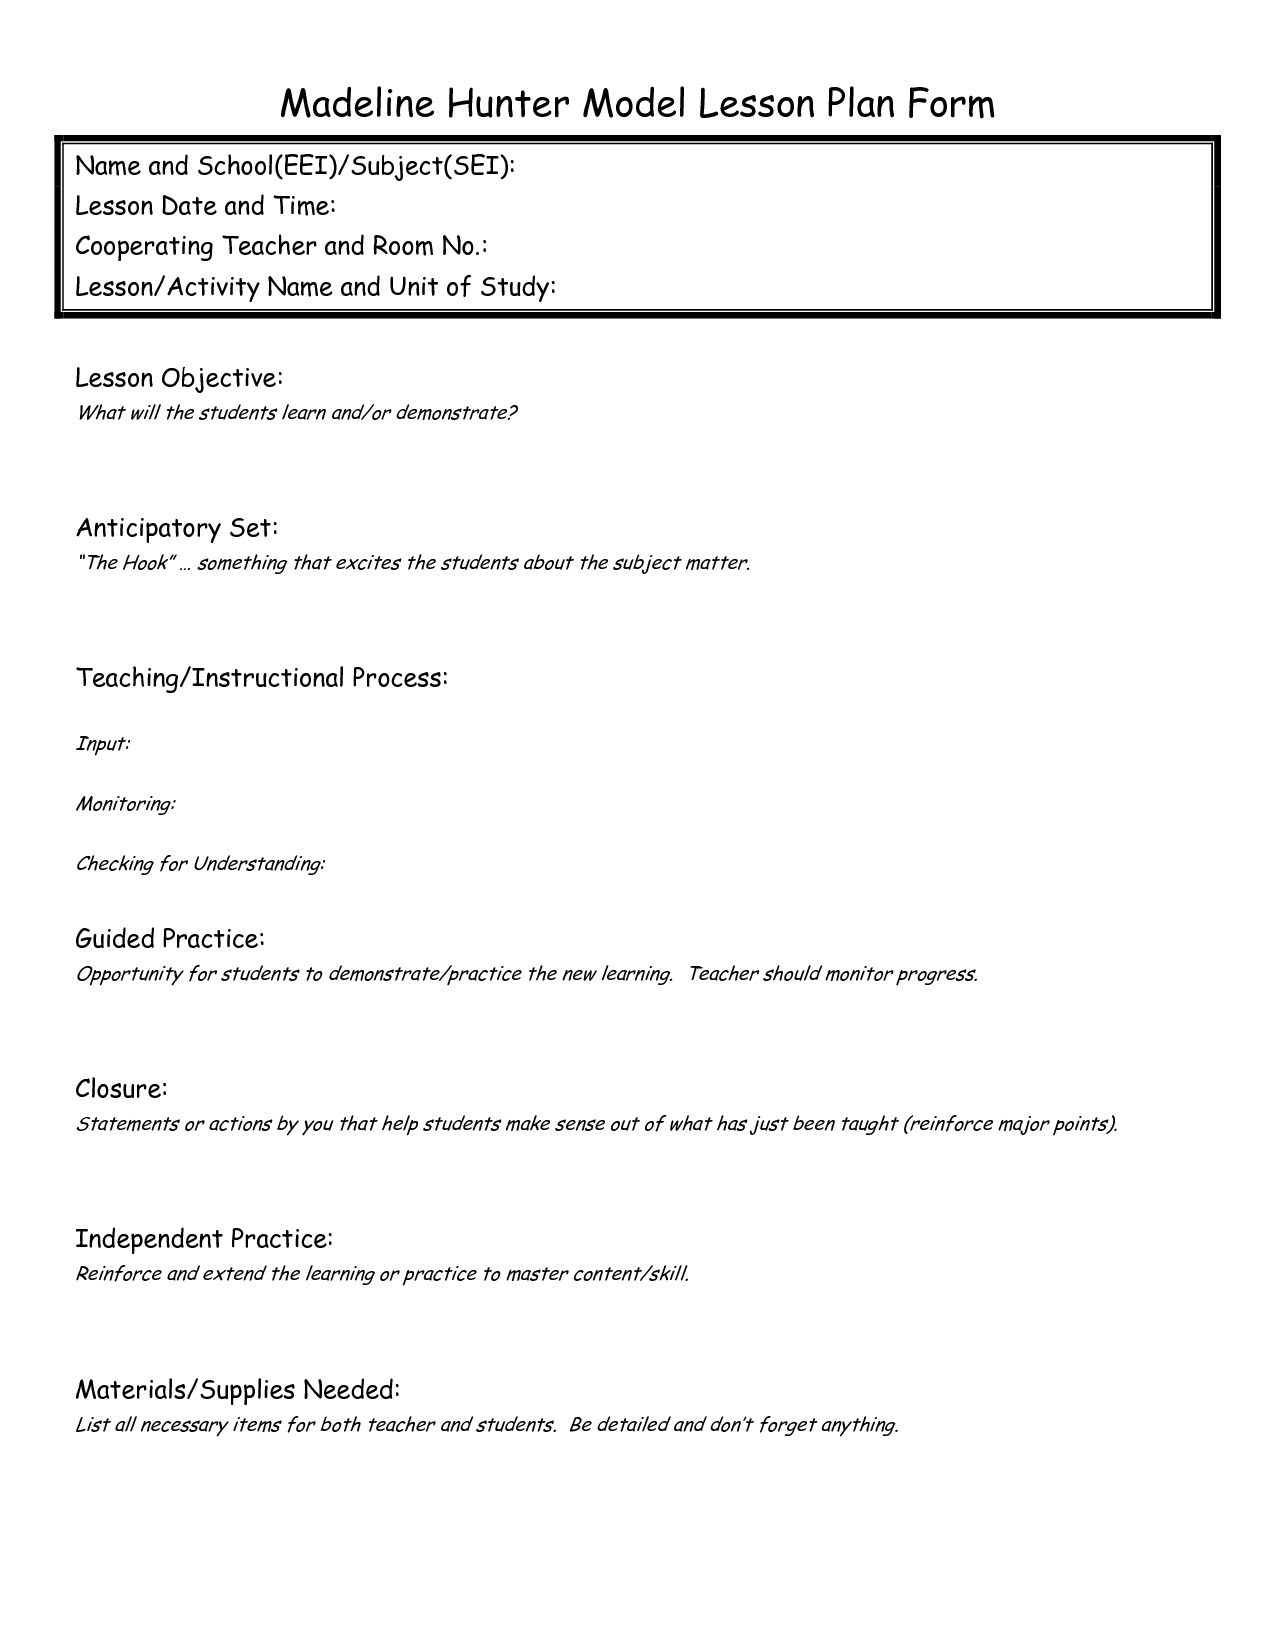 Madeline Hunter Lesson Plan Format Template – Google Search With Madeline Hunter Lesson Plan Template Word